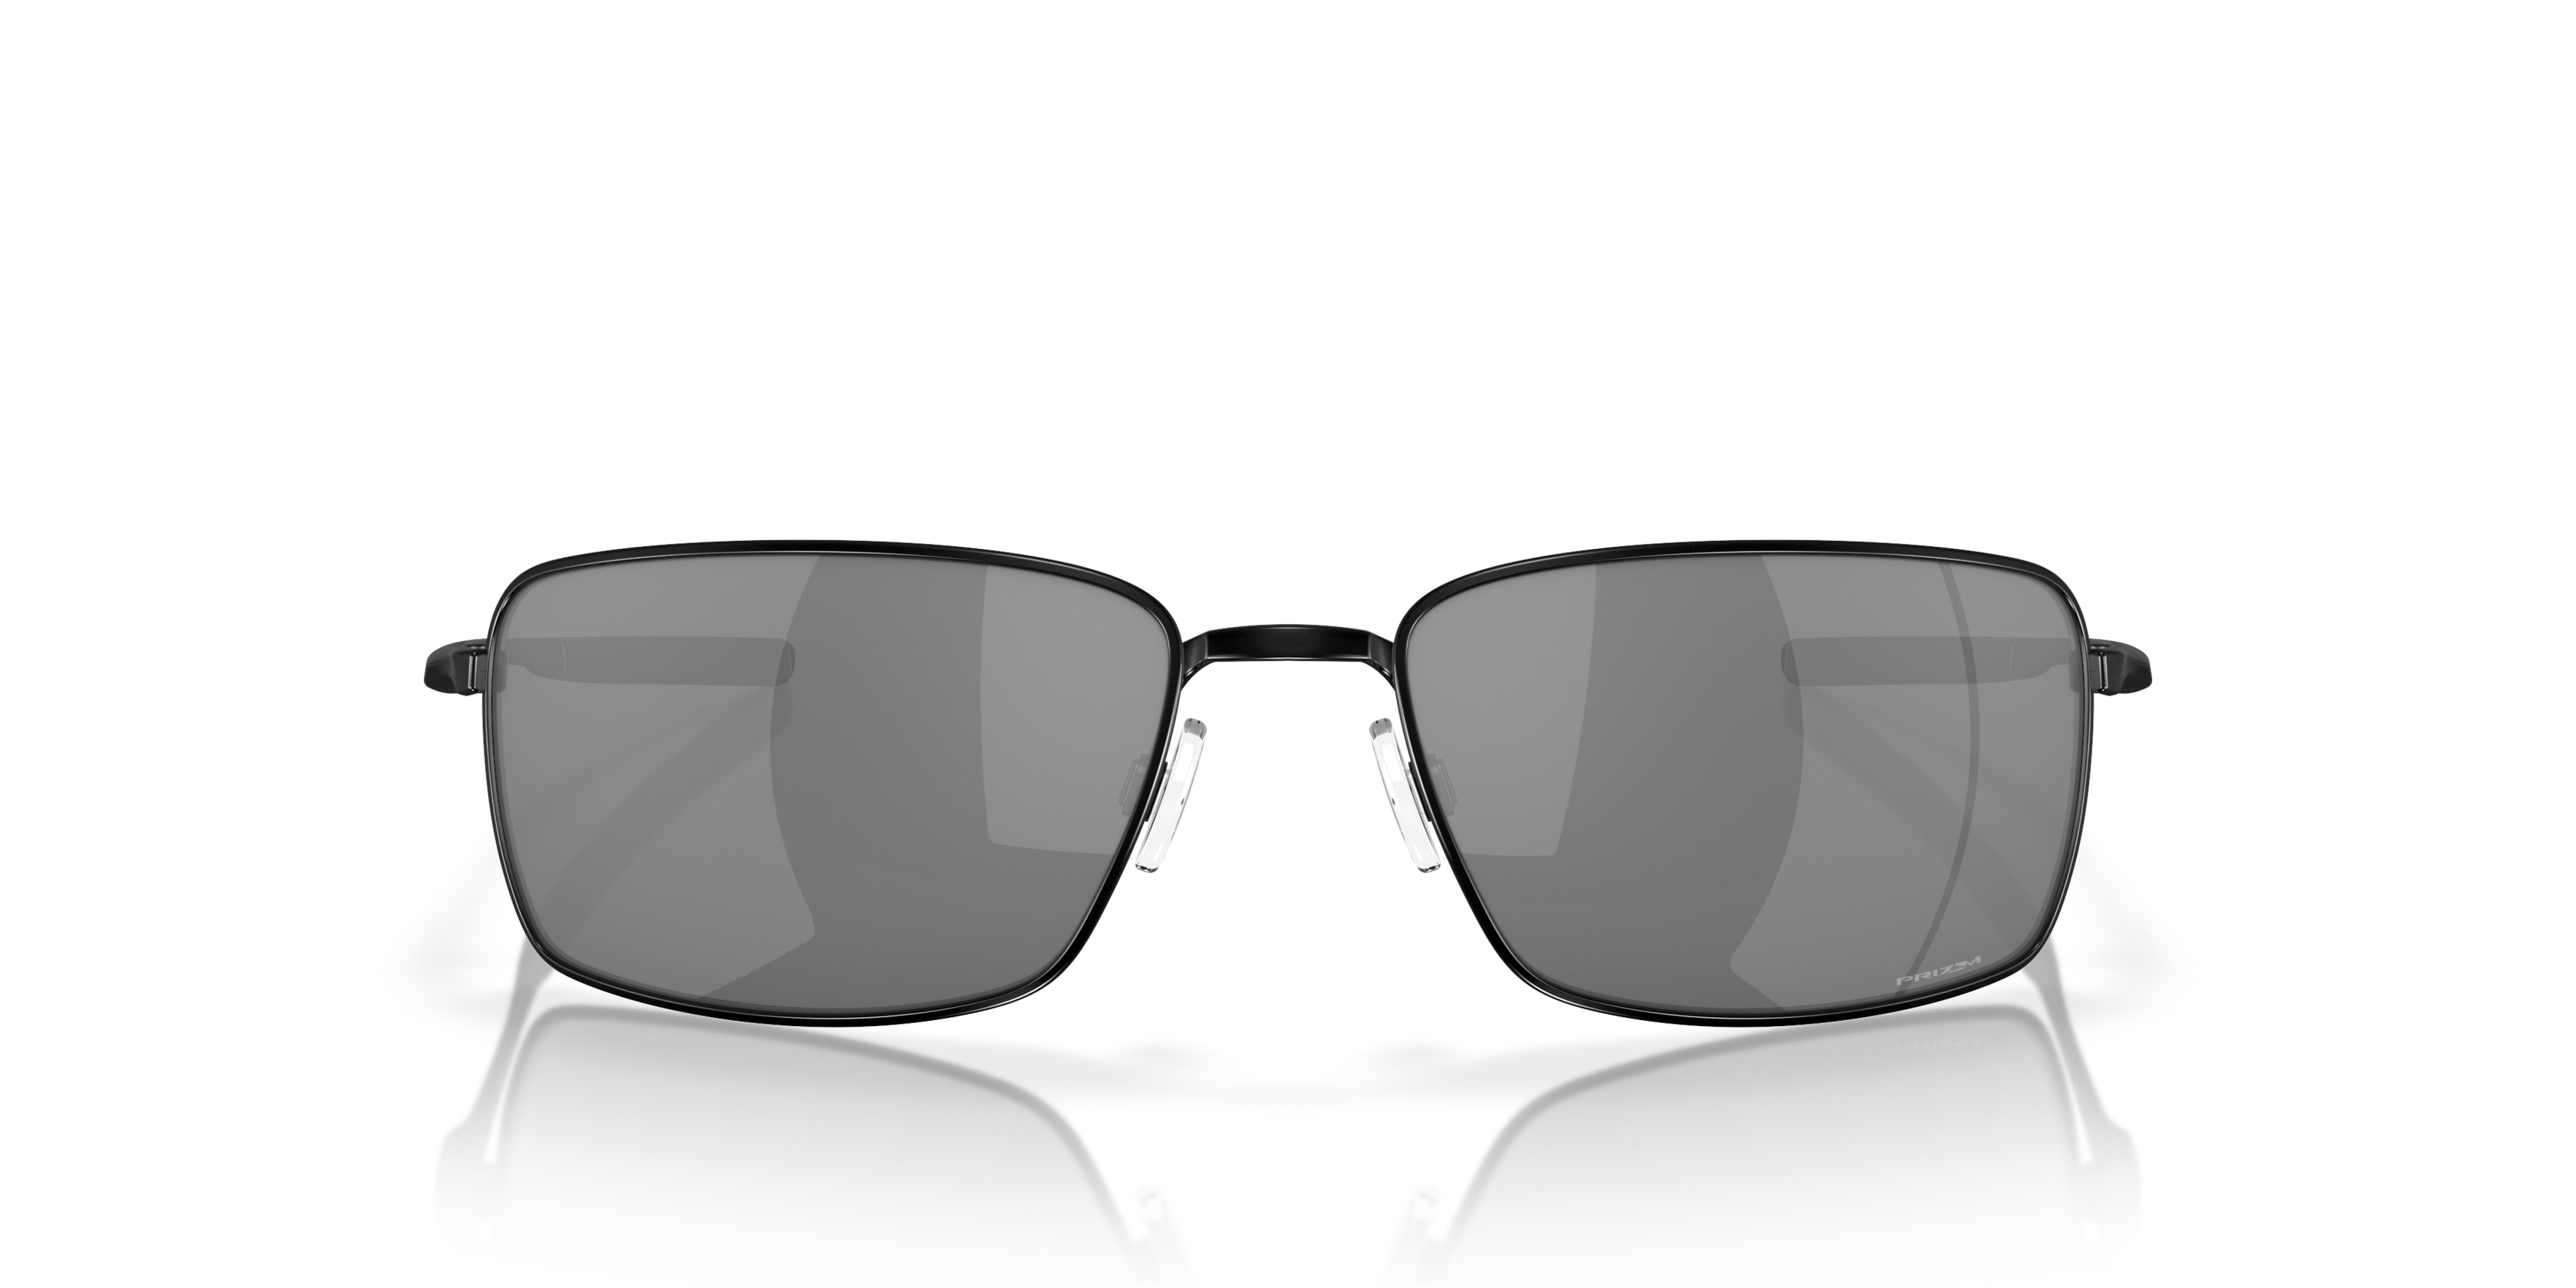 [products.image.front] OAKLEY OO4075 407513